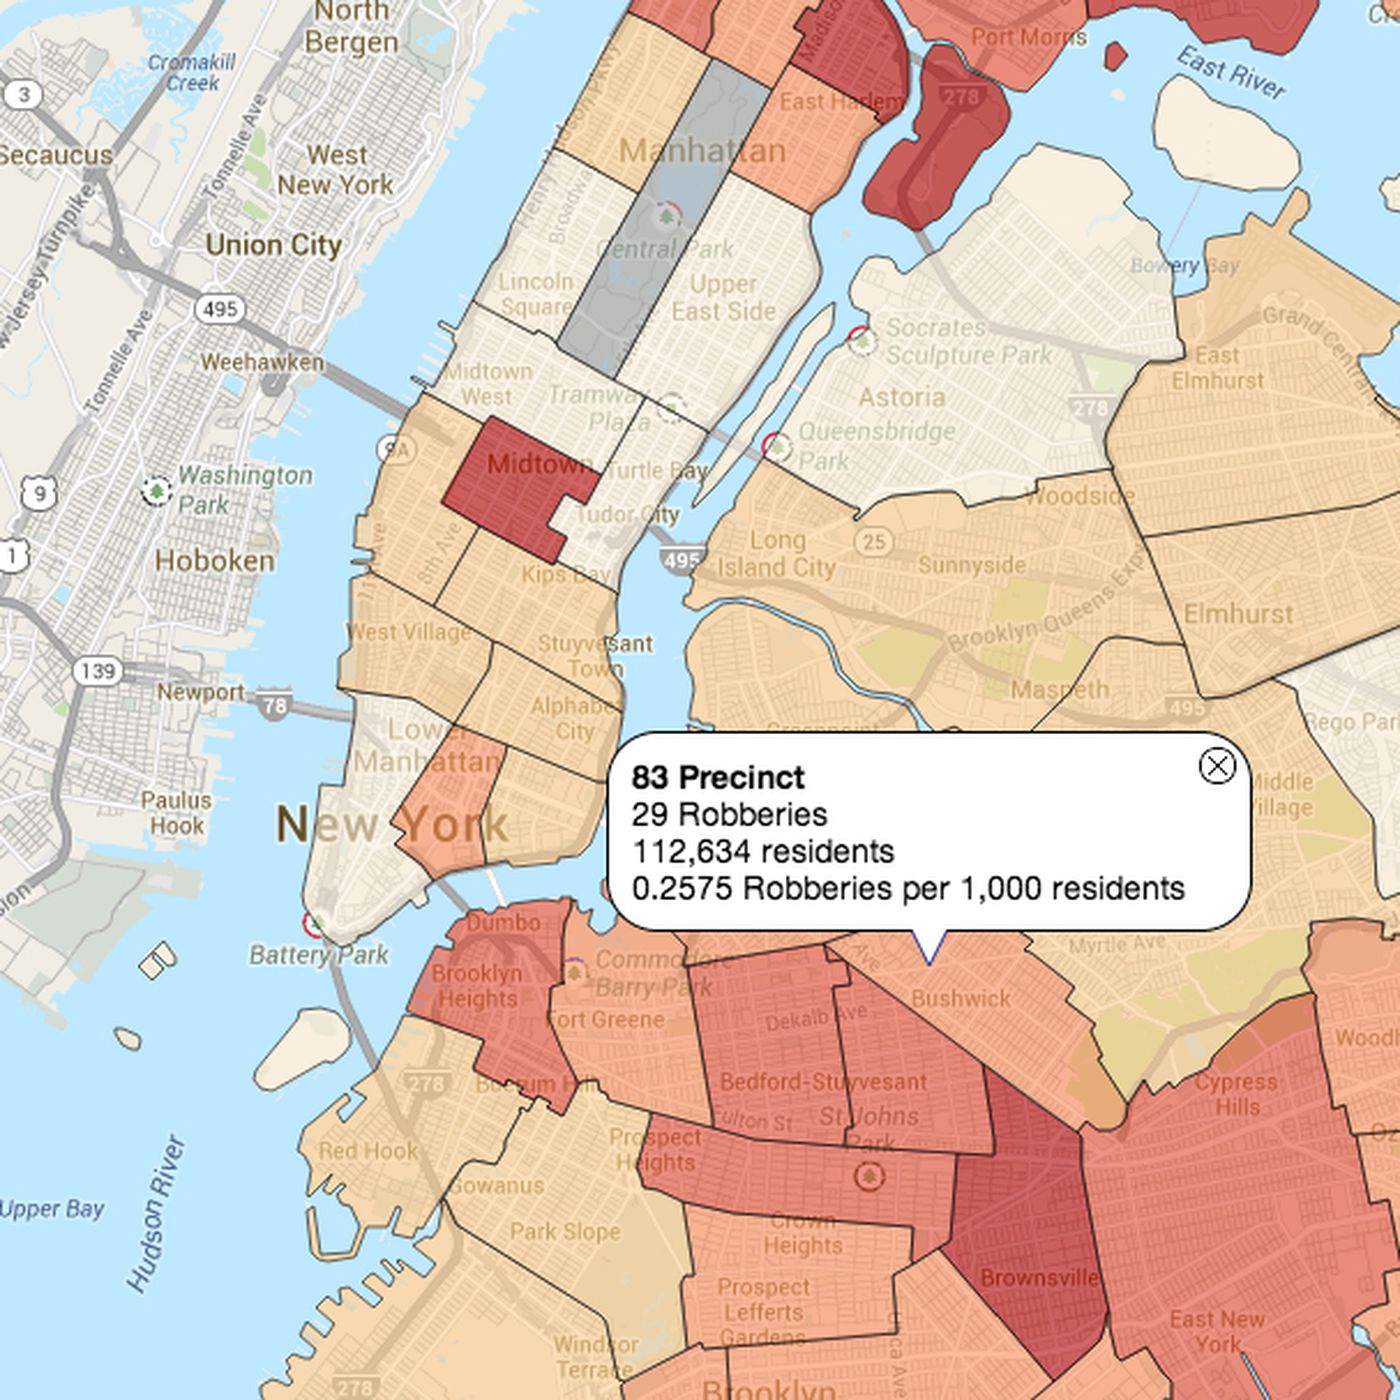 New York Police Department Unveils Interactive Map Of Major Crimes